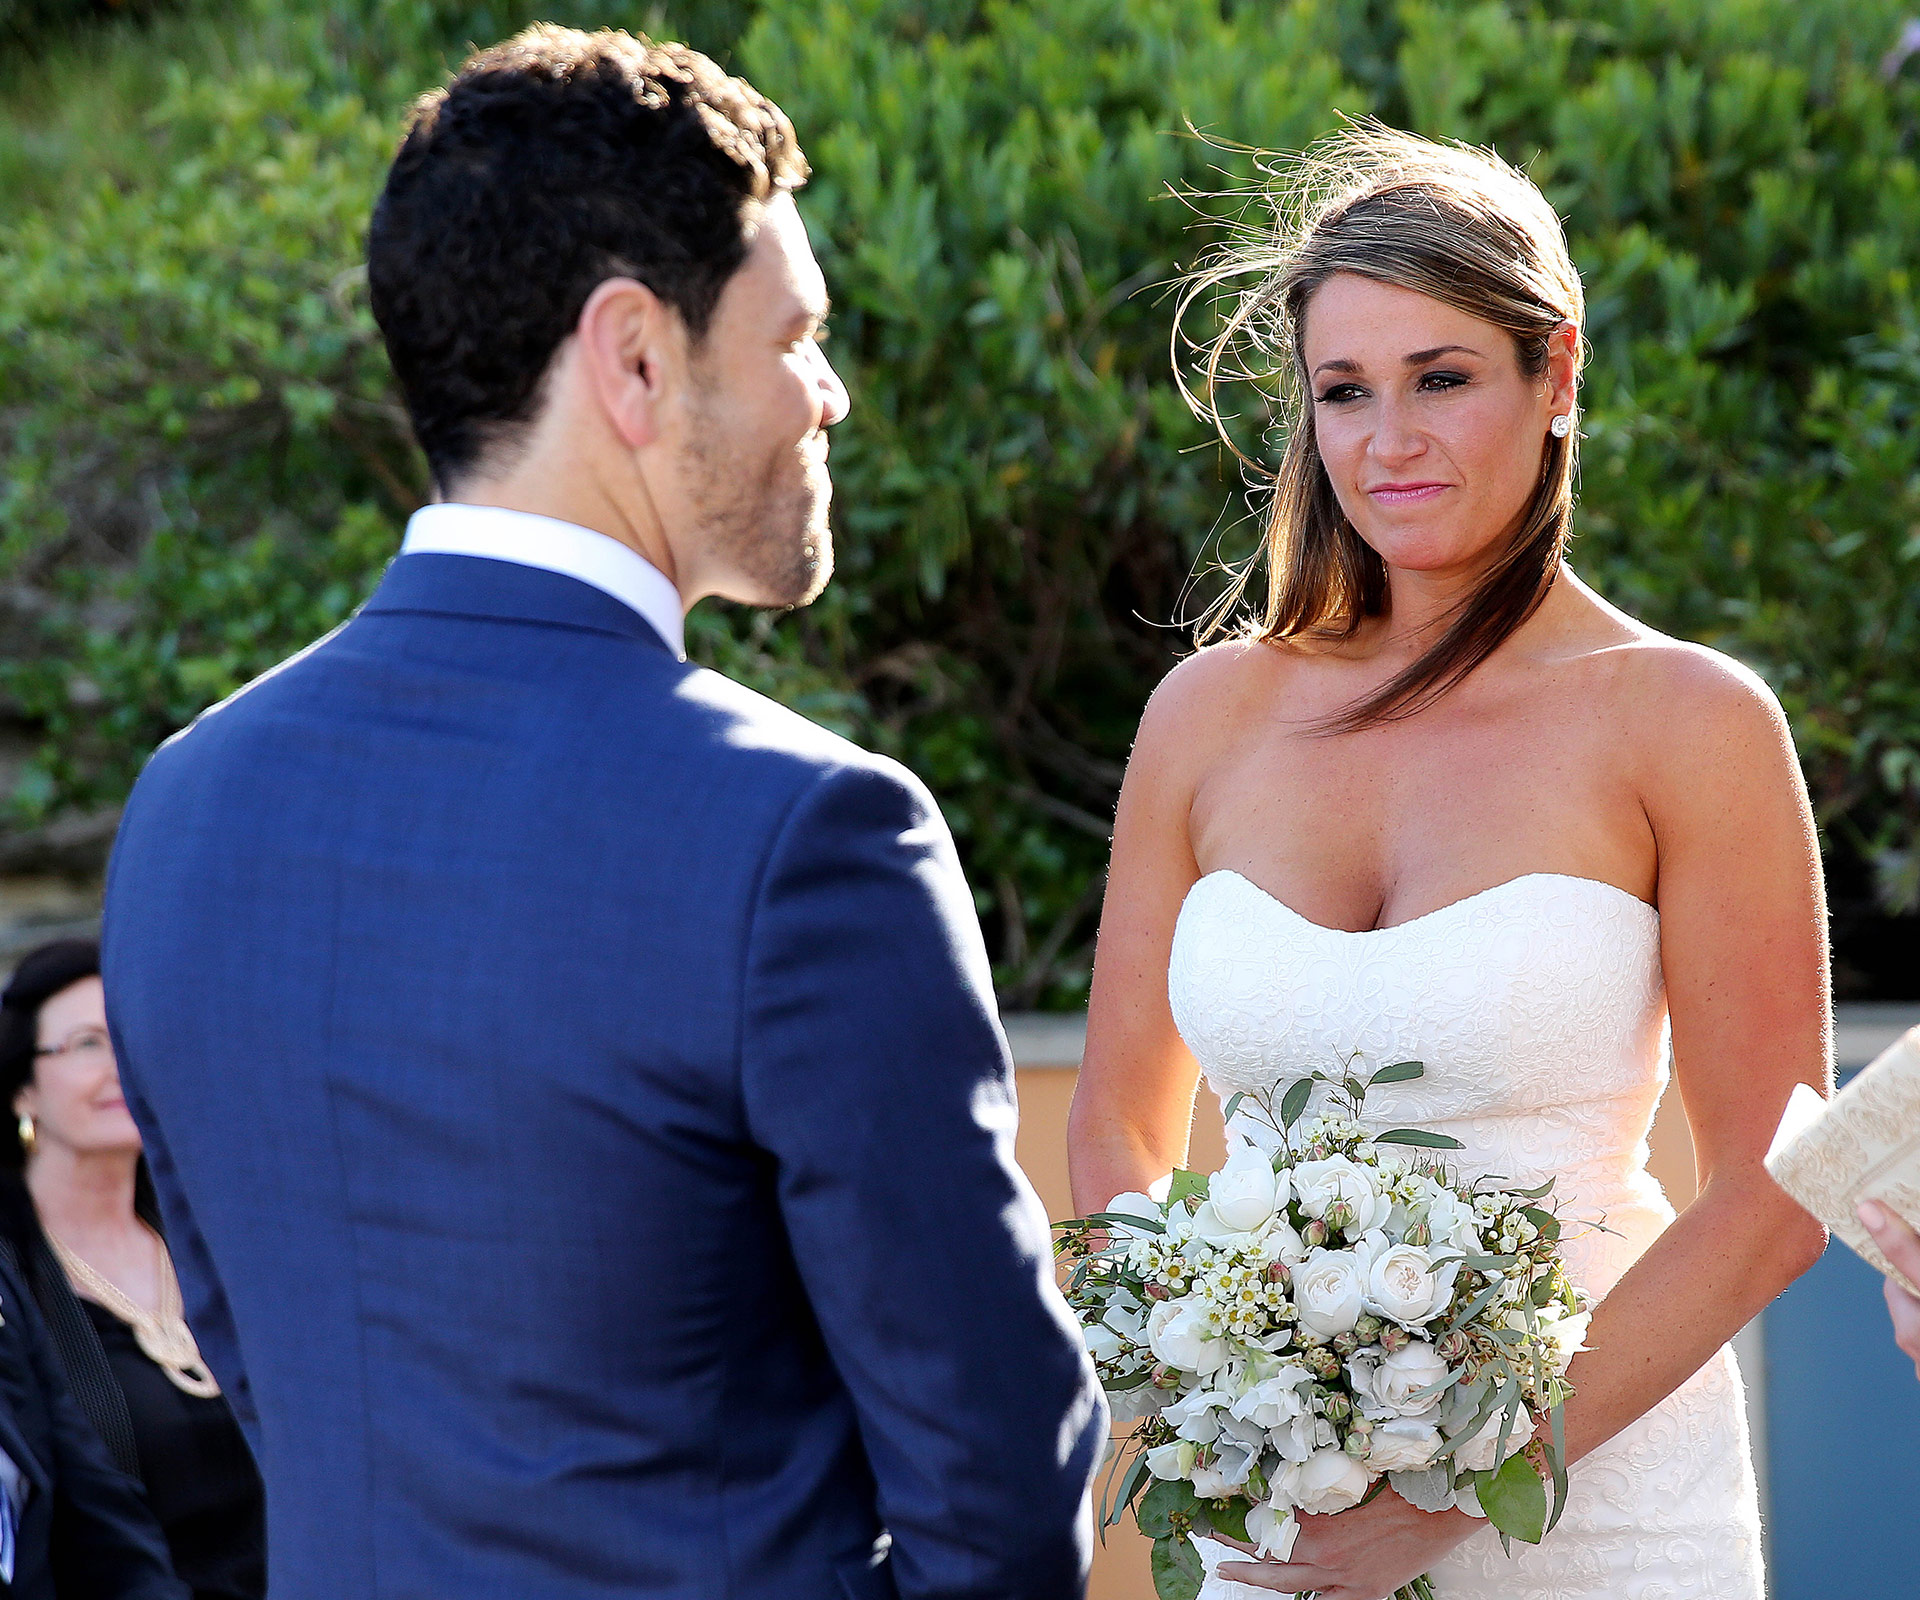 Lauren and Andrew Married At First Sight